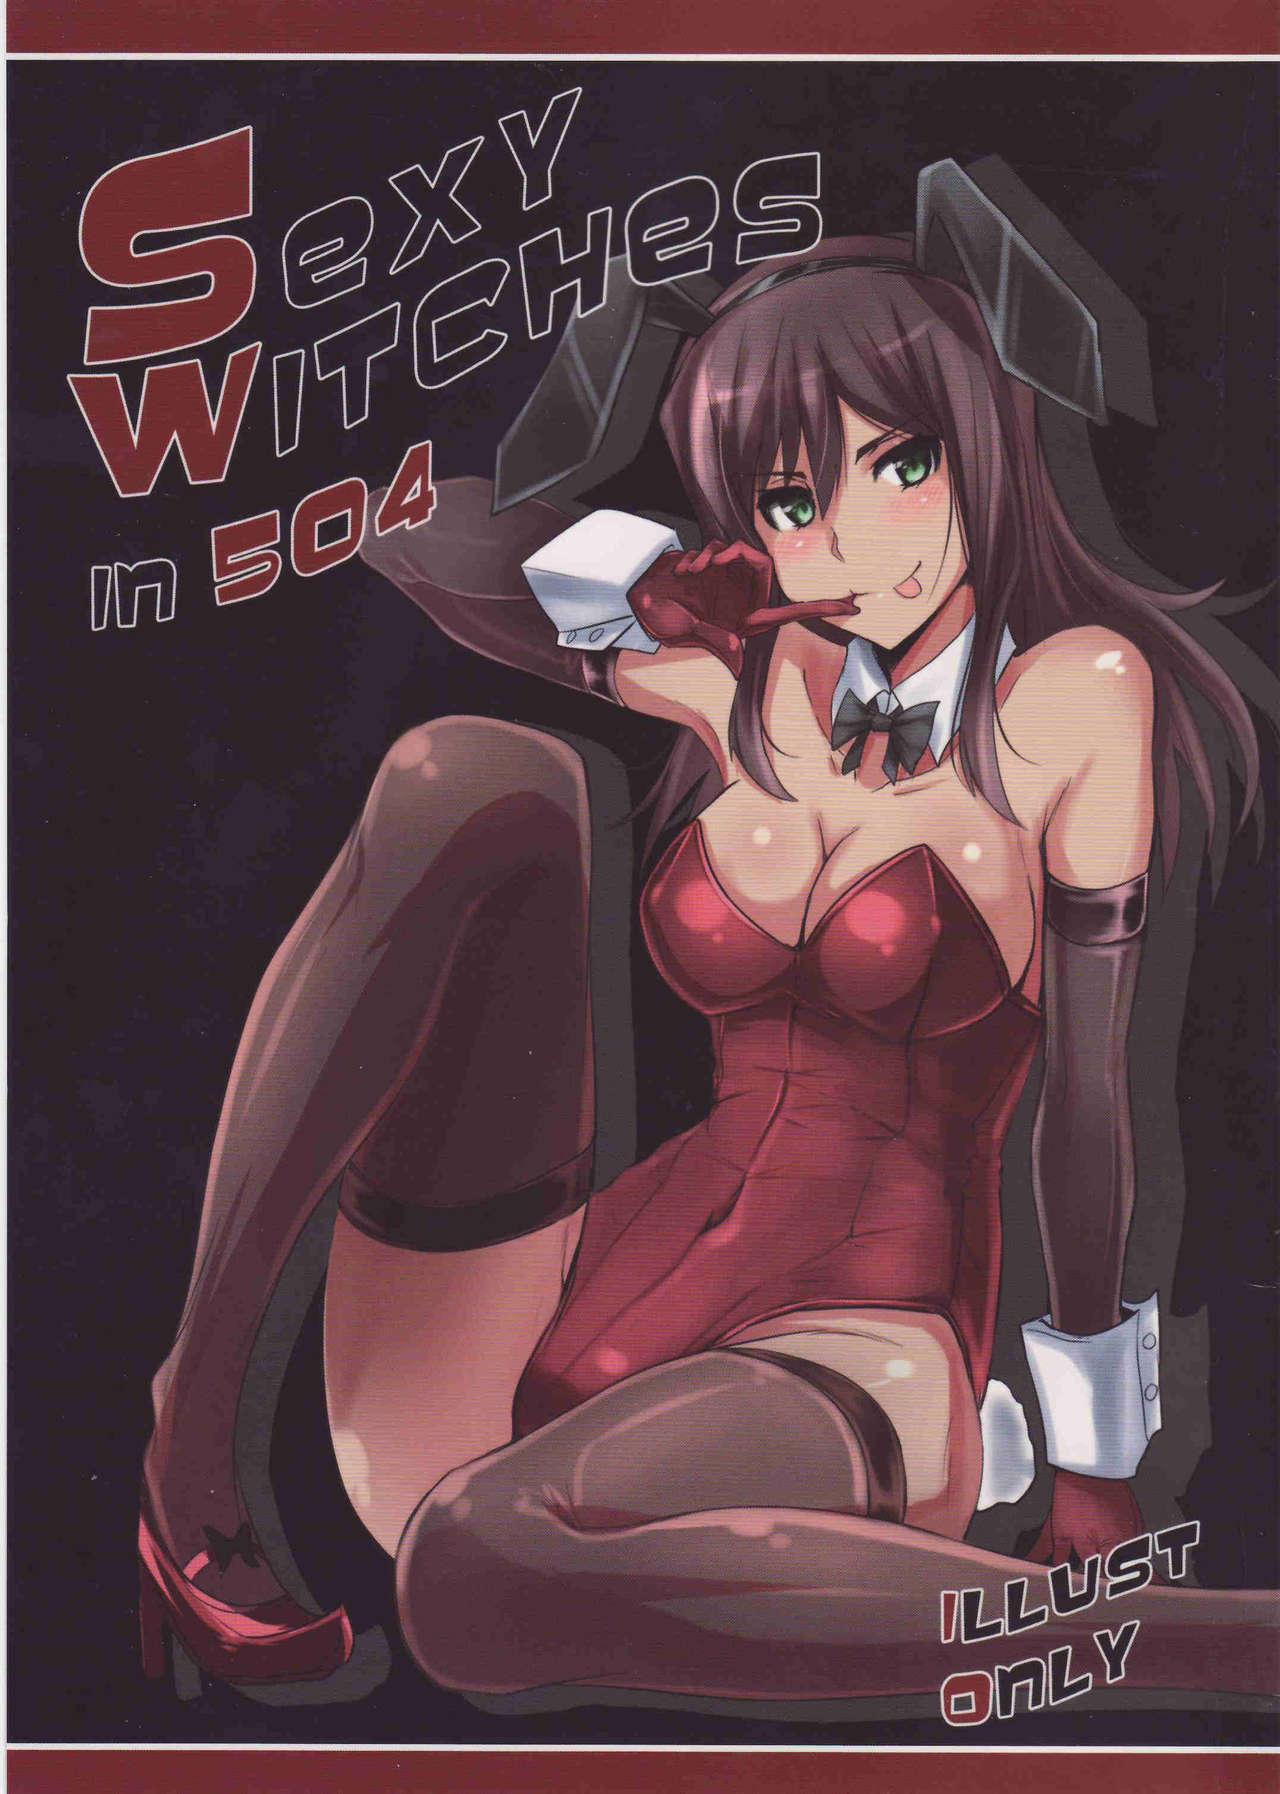 Sexy Witches in 504 0